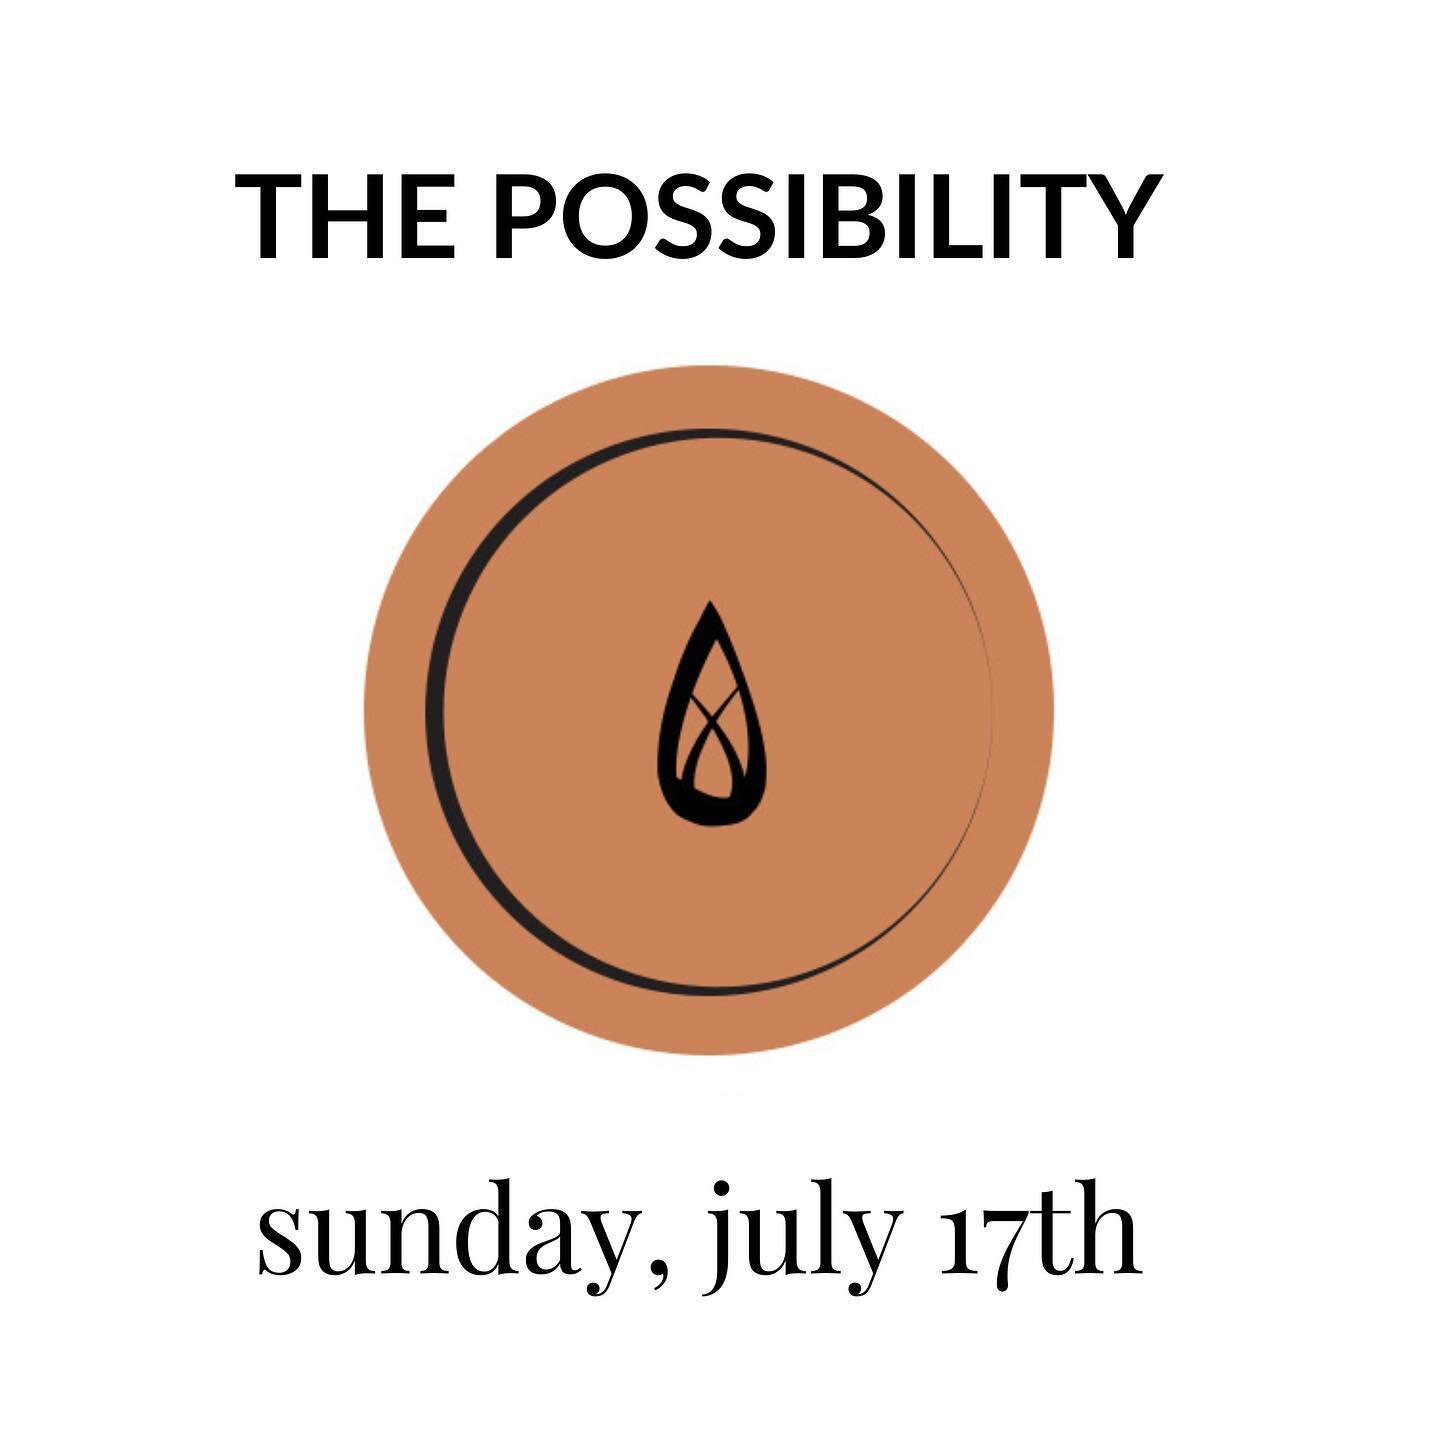 🚨ONLY TWO SPOTS LEFT🚨

Back by popular demand! Our 1-day workshop helps you chart a course for a new possibility in life. 

The Possibility is a chance to create a vision for the next bold move in your life. In a supportive community of like-minded